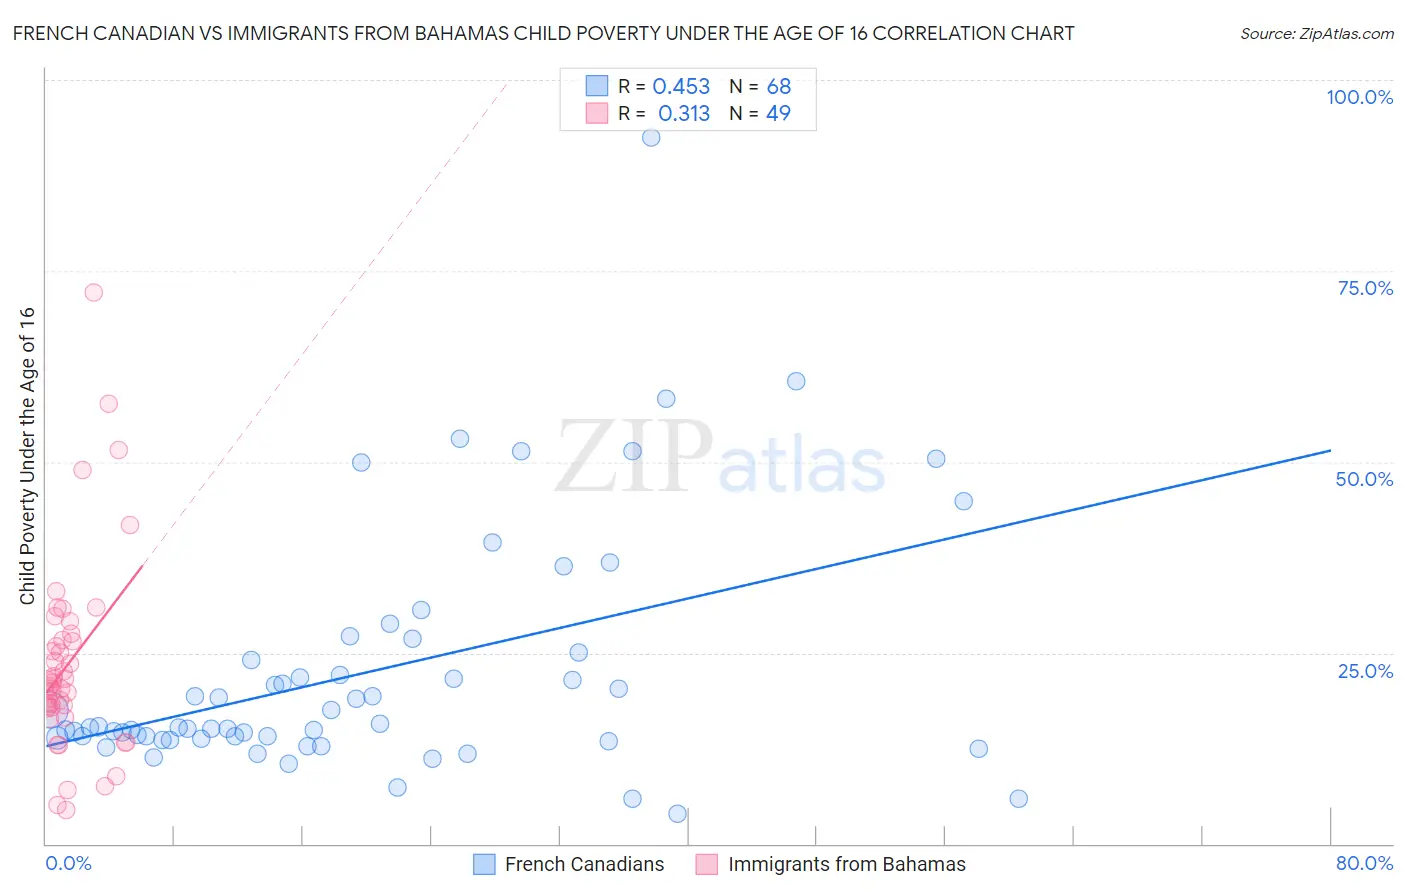 French Canadian vs Immigrants from Bahamas Child Poverty Under the Age of 16